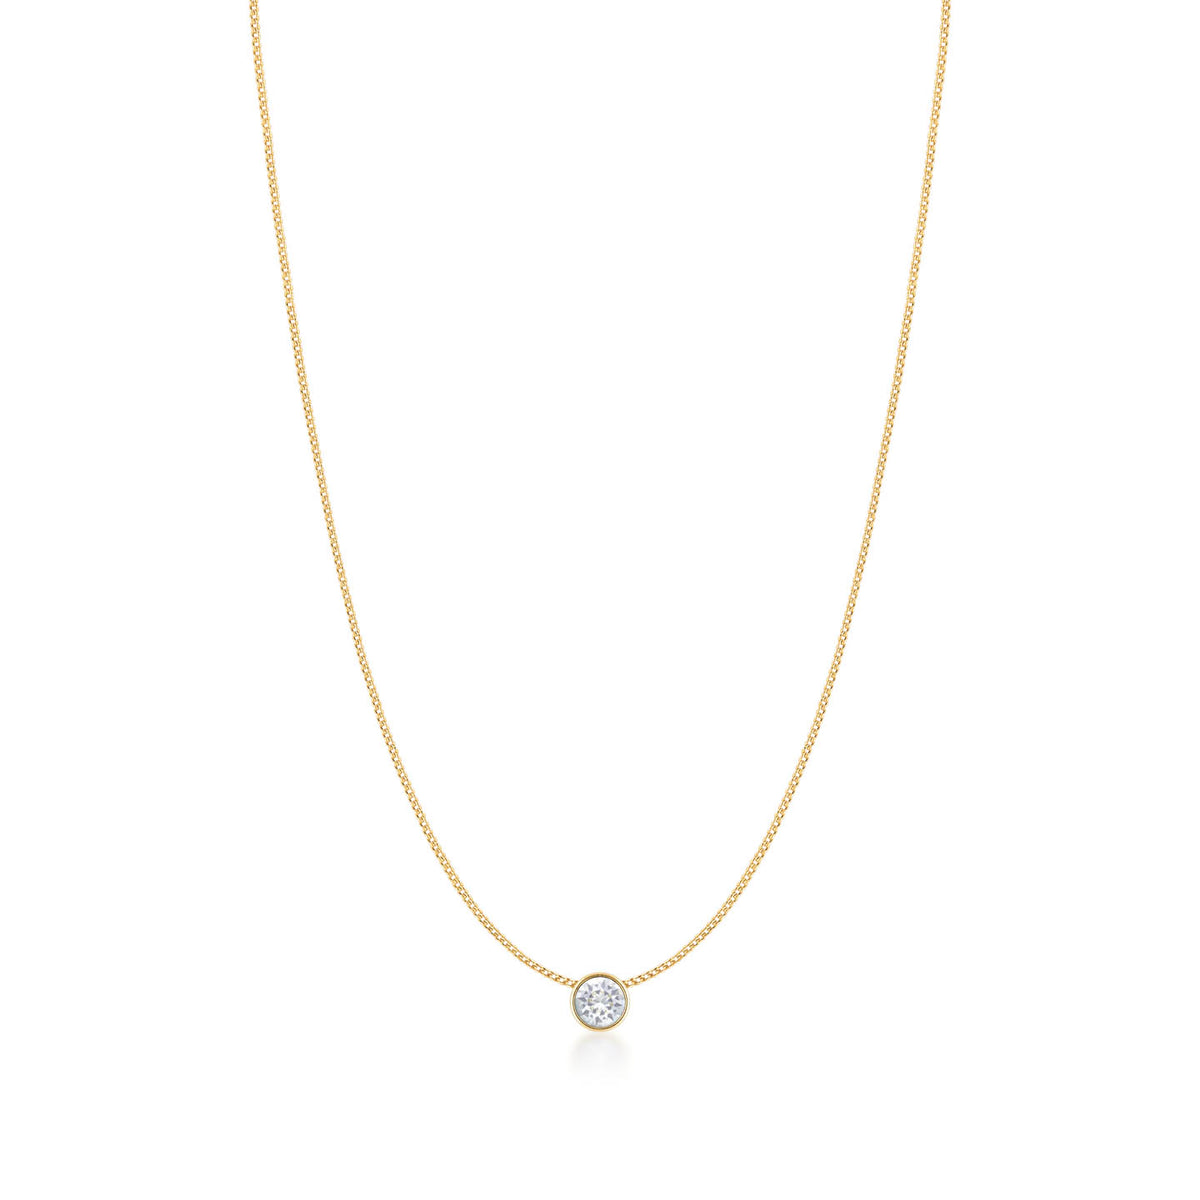 Harley Small Pendant Necklace with White Clear Round Crystals from Swarovski Gold Plated - Ed Heart